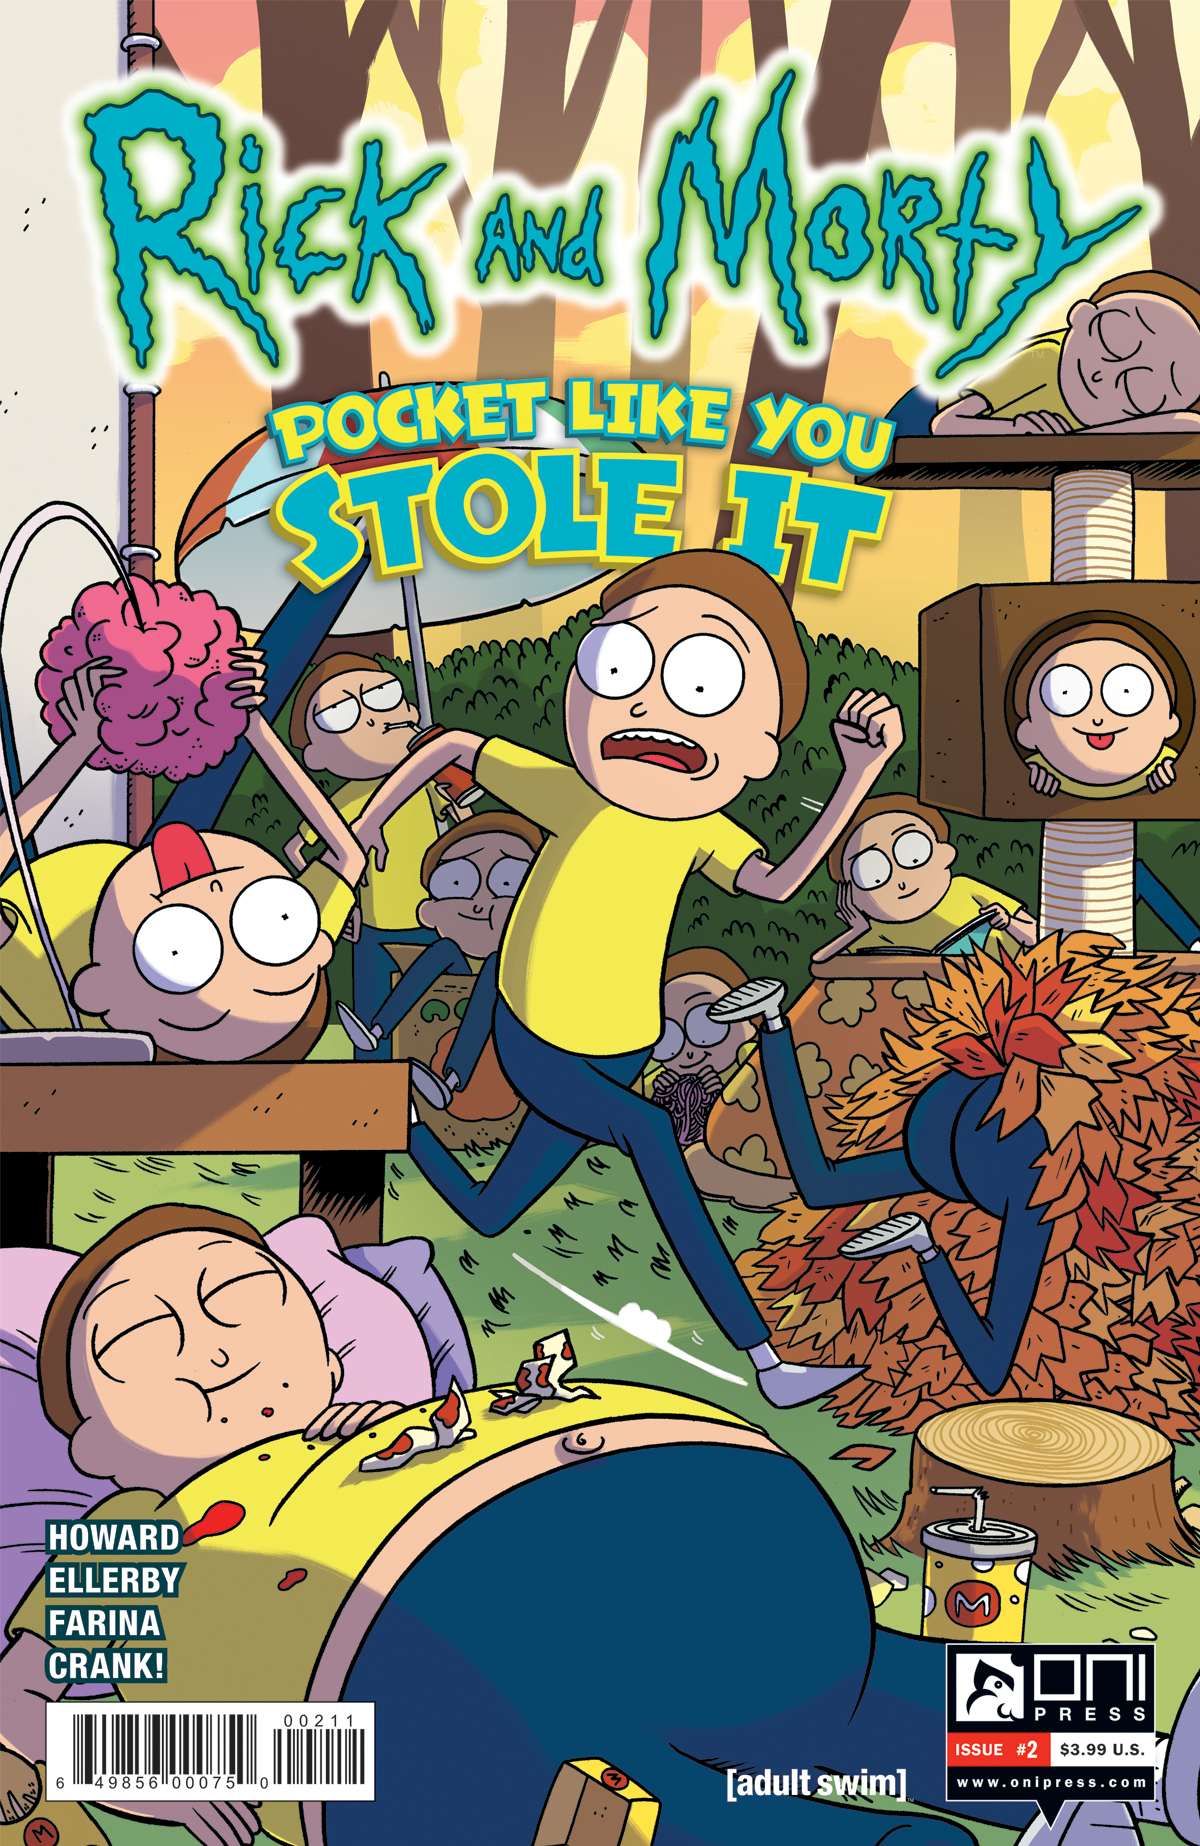 Cover to 'Rick and Morty: Pocket Like You Stole It' #2. Art by Marc Ellerby and Katy Farina/Oni Press